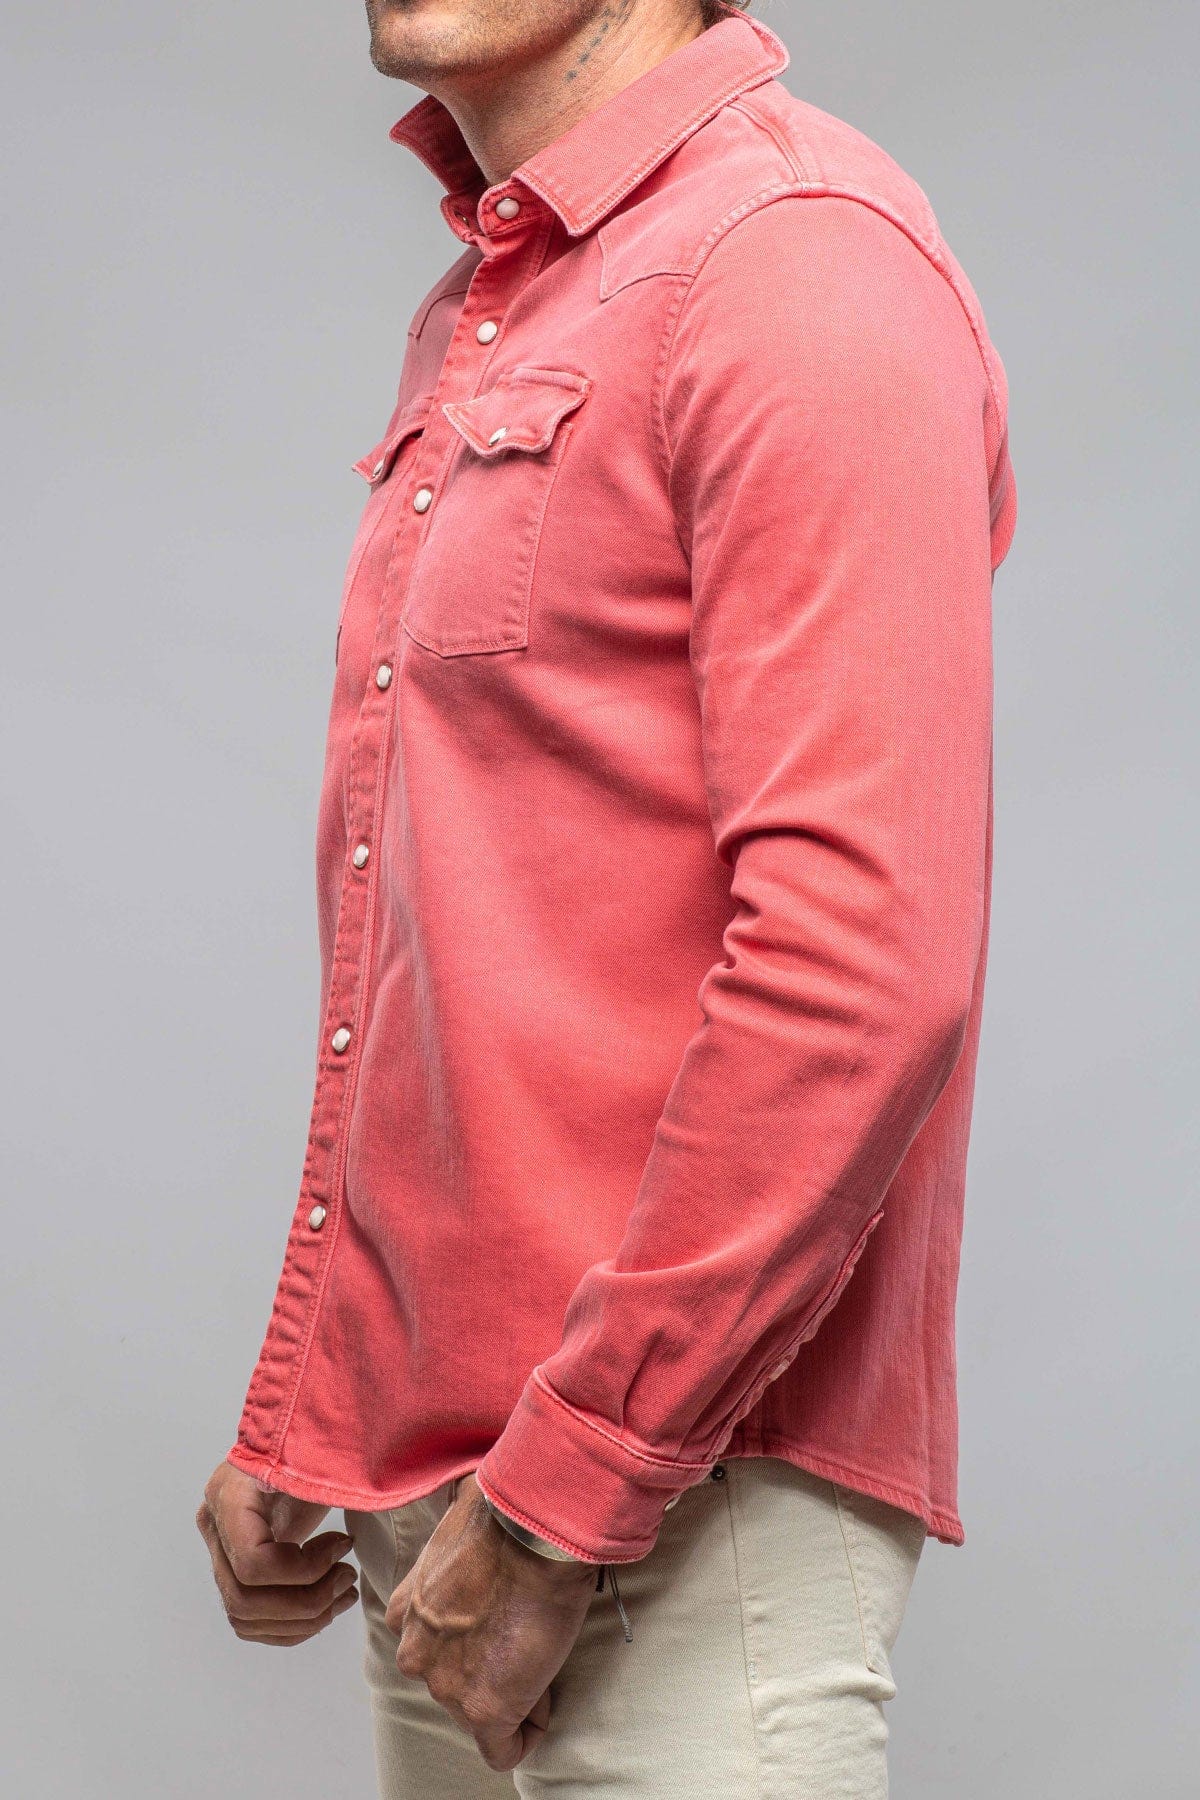 Ranger Colored Denim Snap Shirt In Washed Corallo - AXEL'S